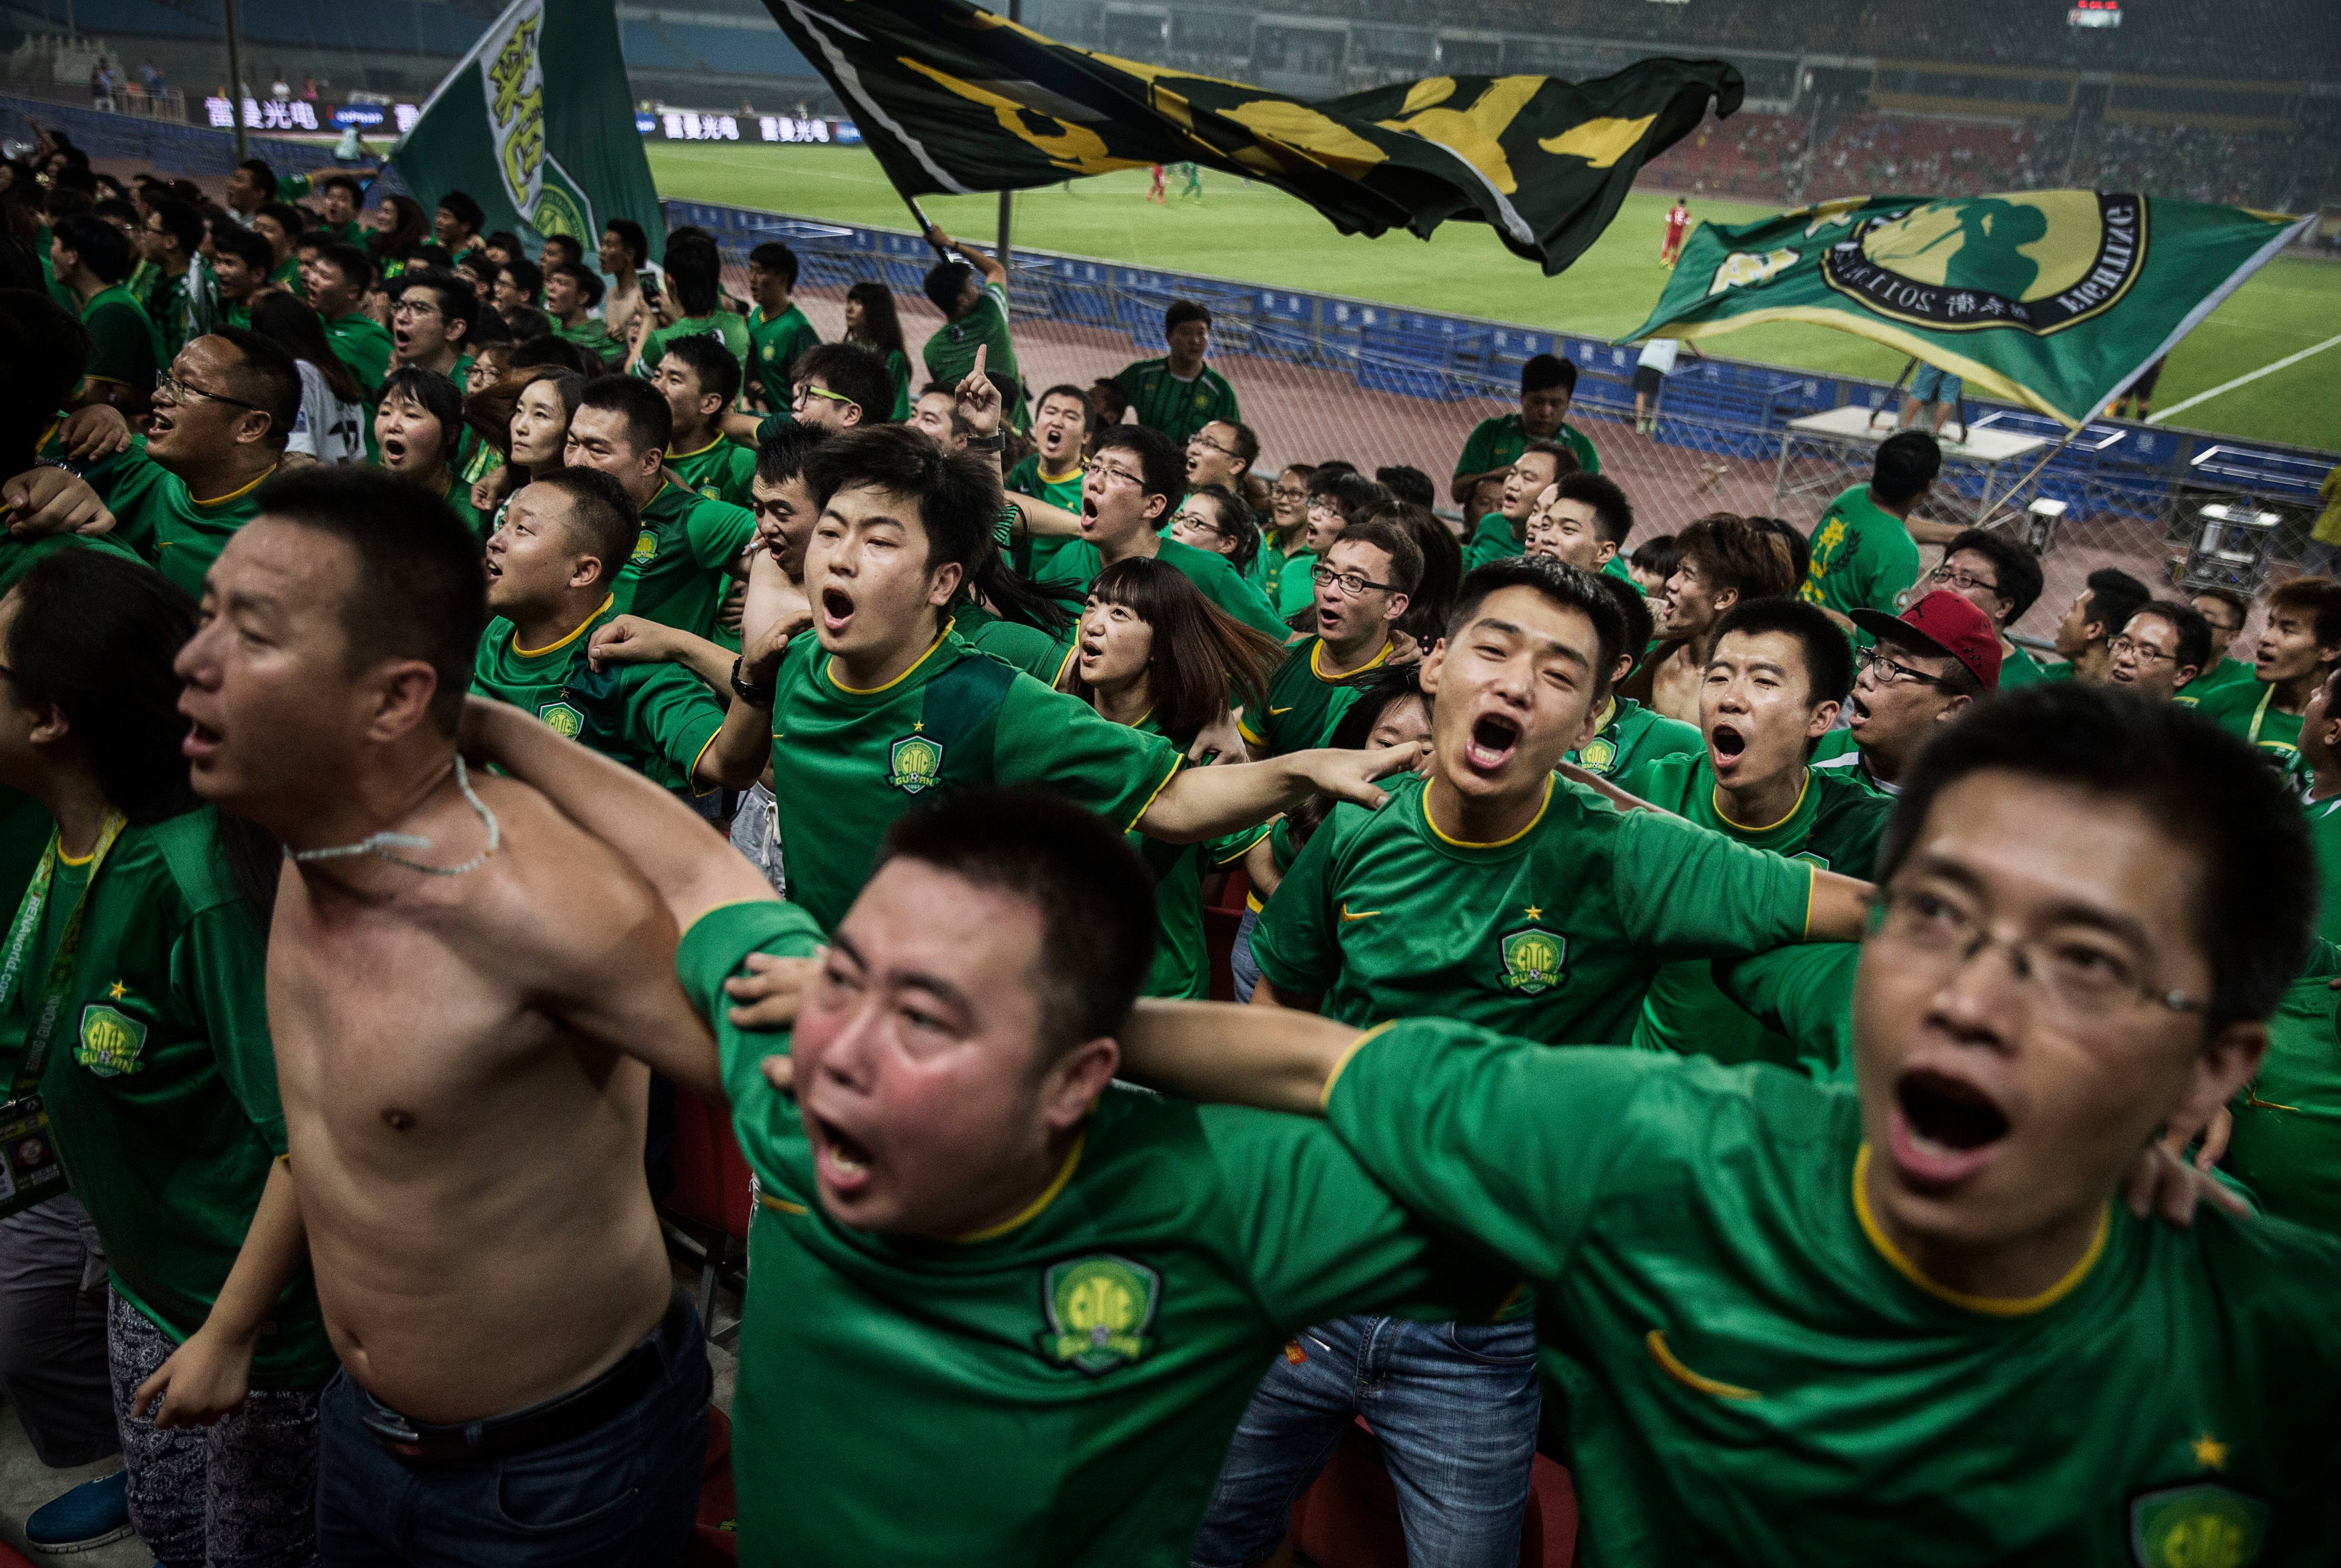 Ultra-supporters and fans of the Beijing Guoan FC celebrate together after a goal against Chongqing Lifan FC during their Chinese Super League match on June 28, 2015, in Beijing (Kevin Frayer—Getty Images)